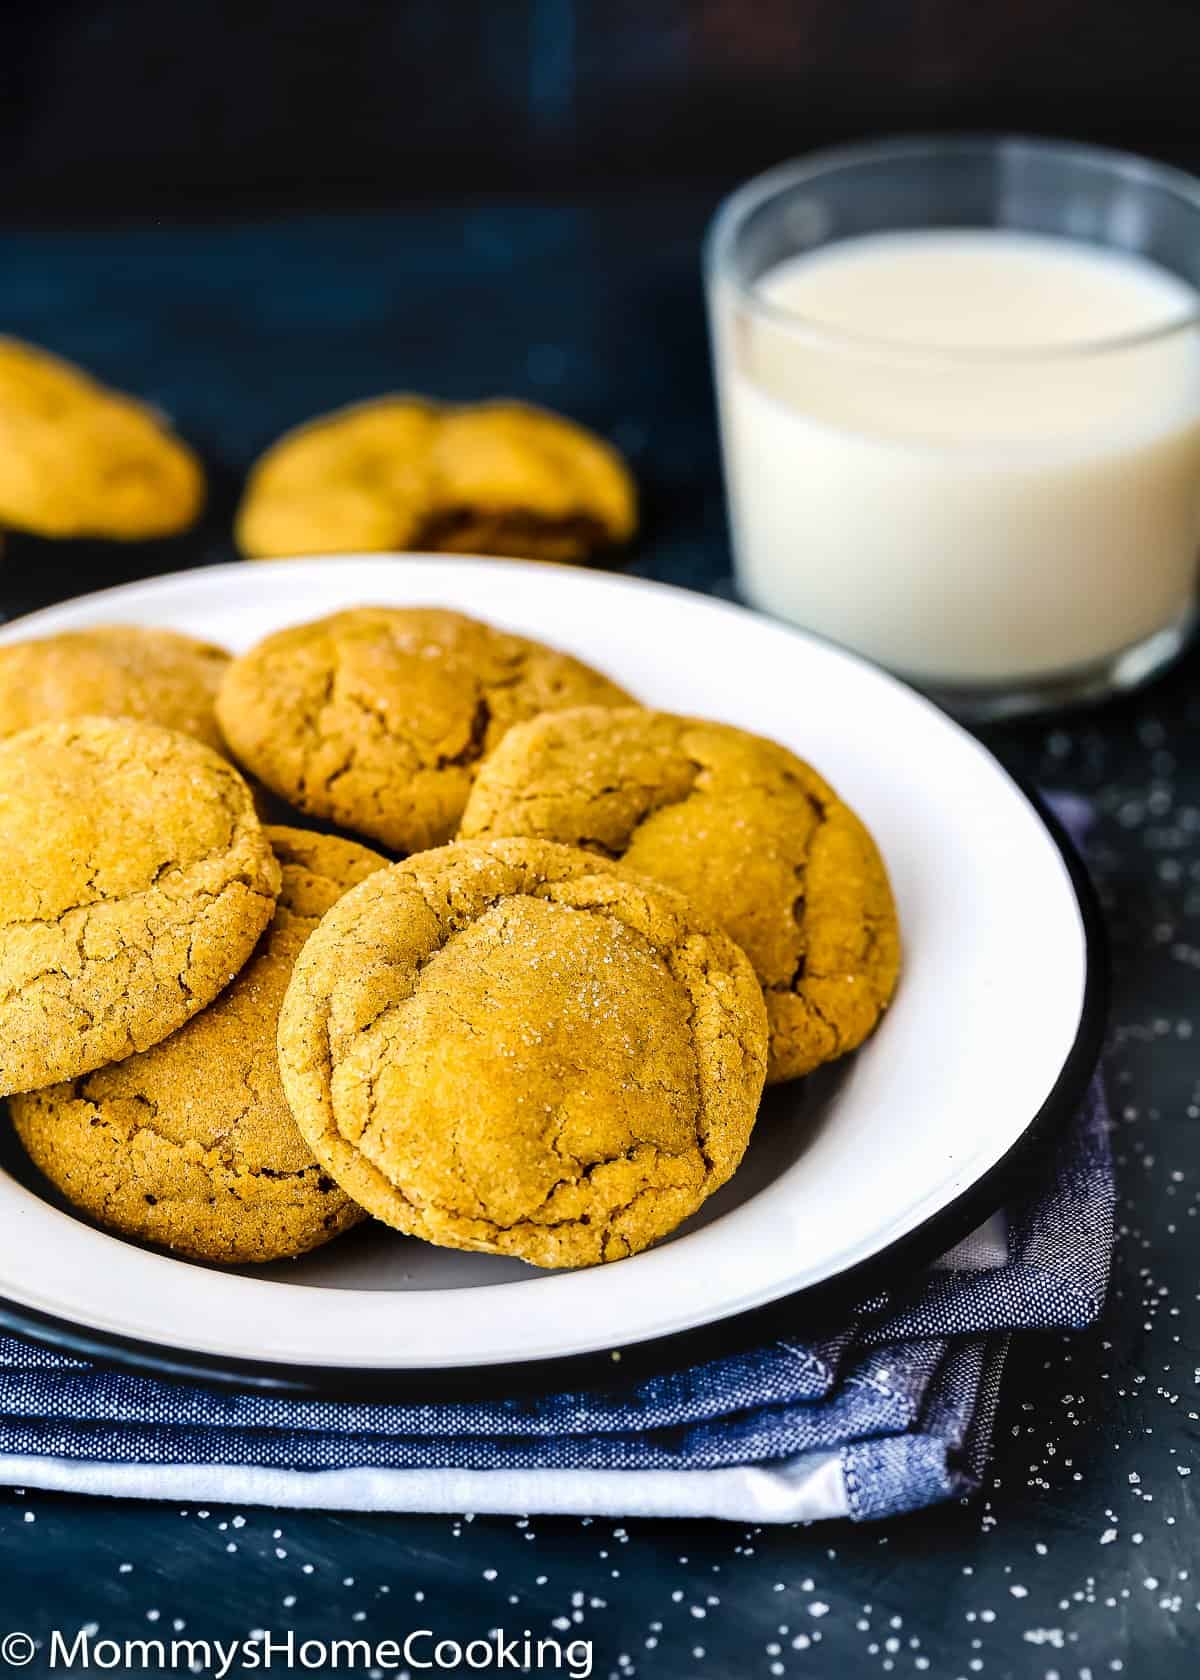 Eggless Pumpkin Snickerdoodles cookies in a plate with a glass of milk.